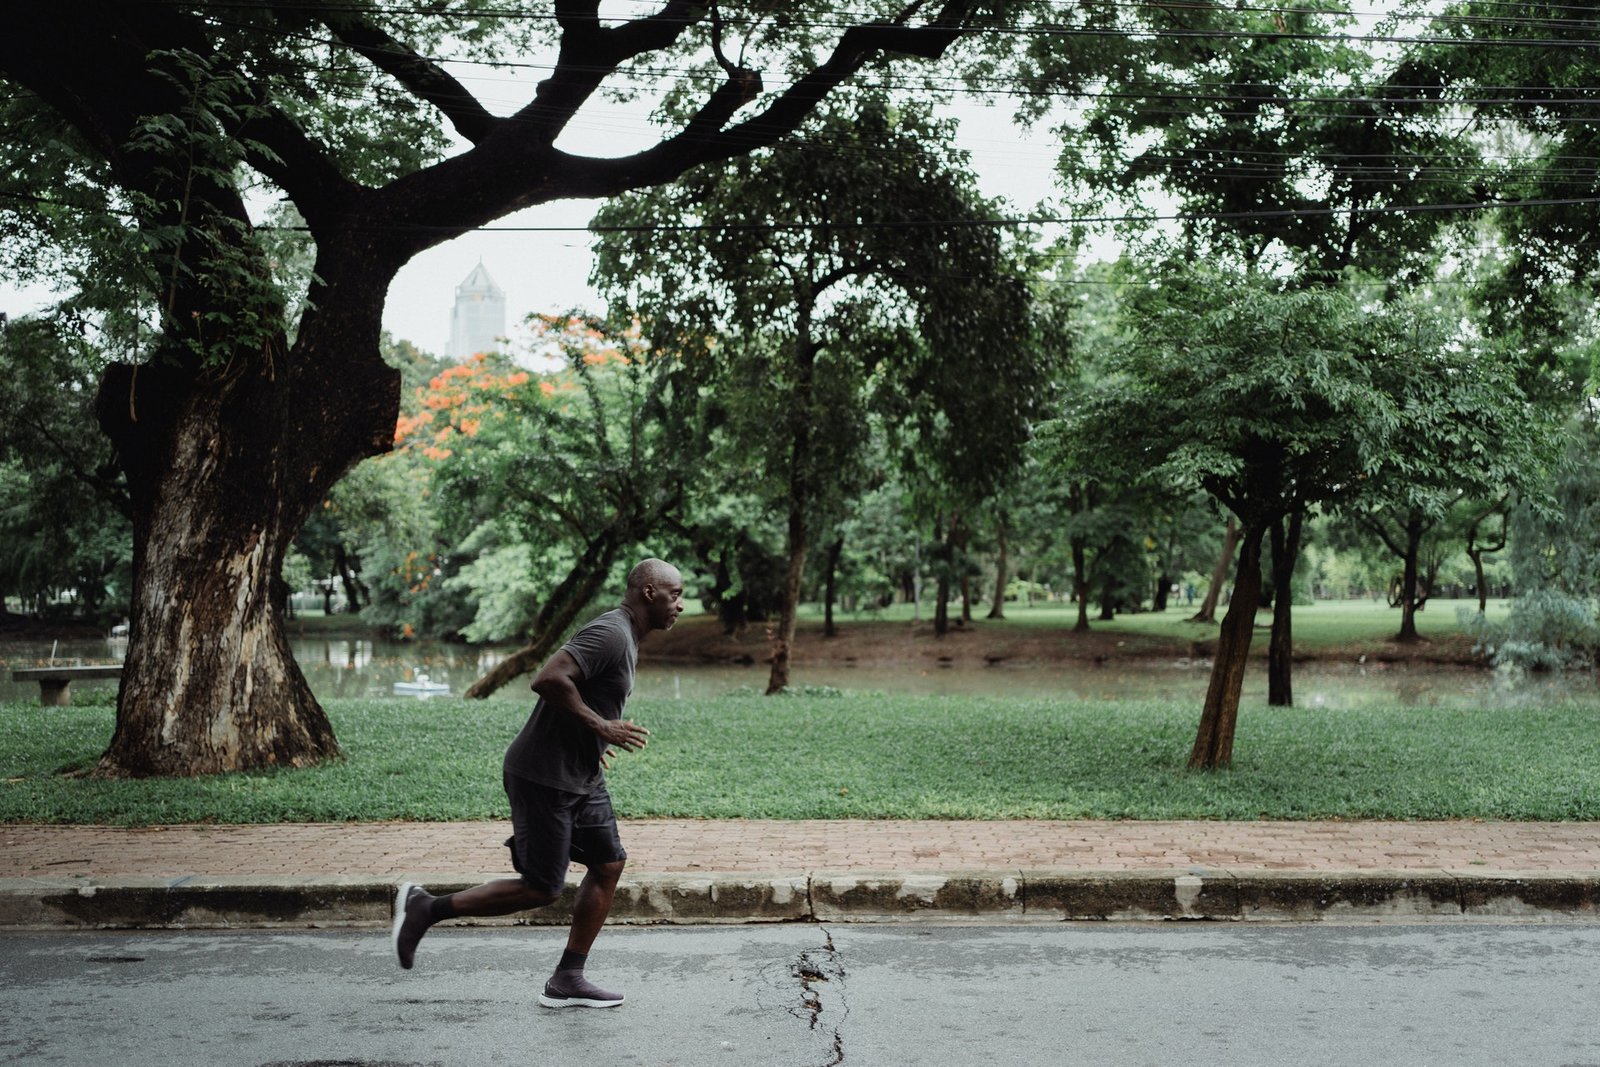 A man running for weight loss, with trees in the background. It isn't easy, but it works with consistency.